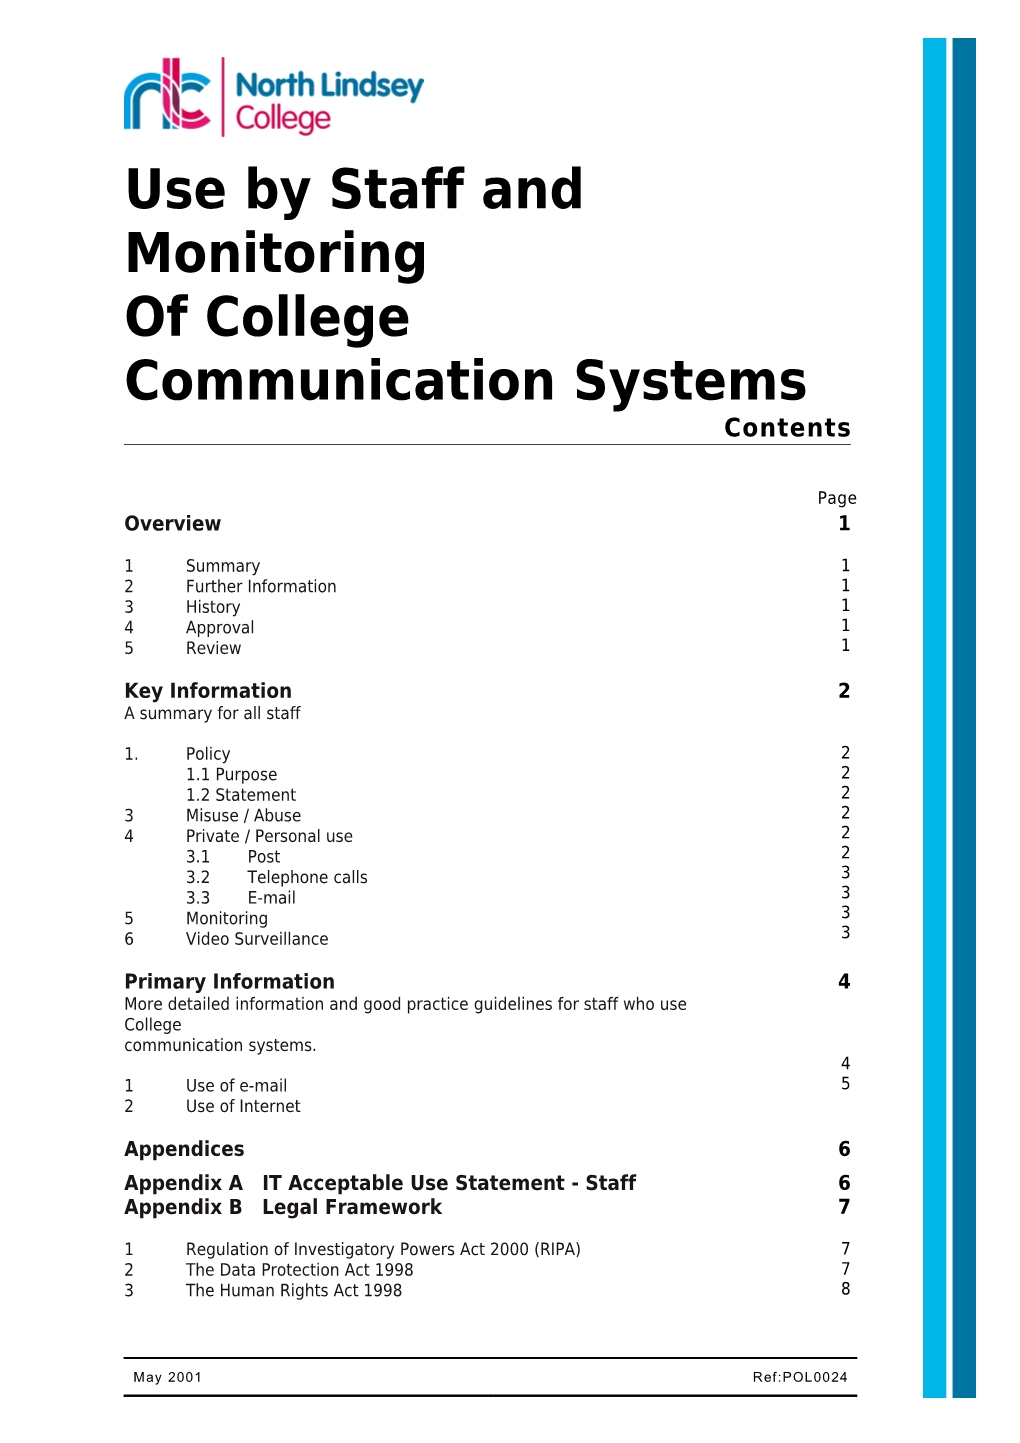 Use by Staff and Monitoring